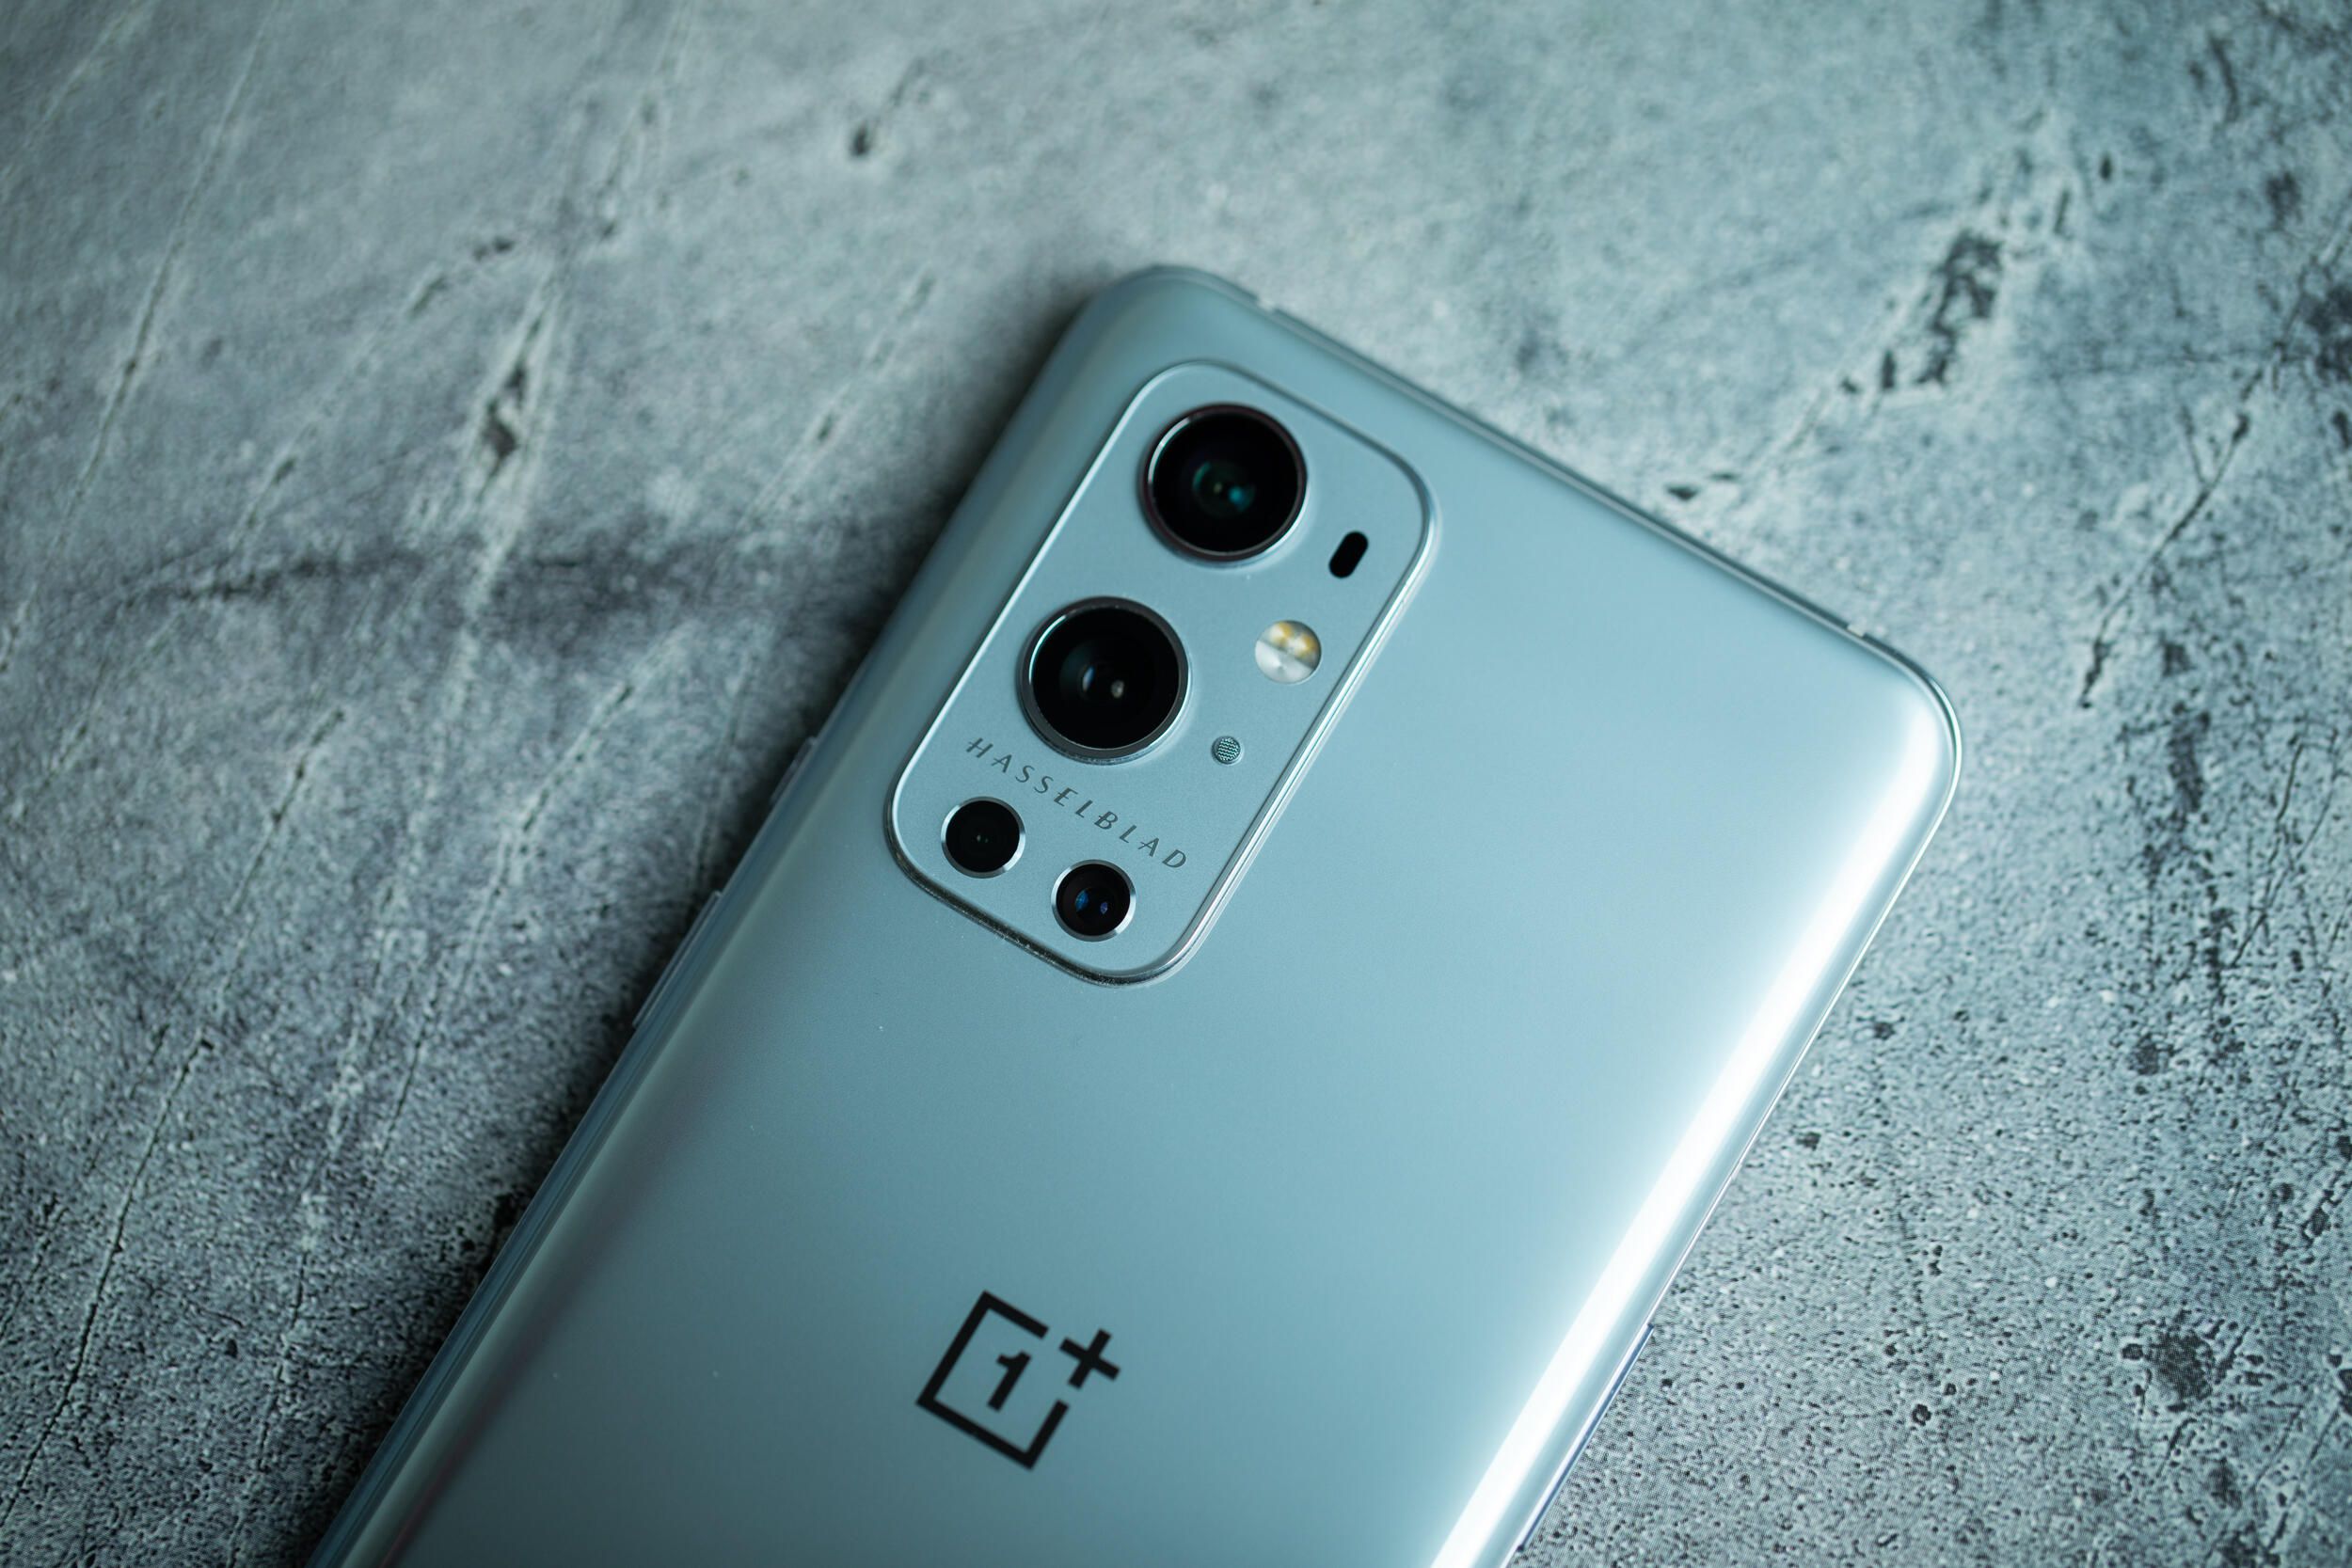 Insider: OnePlus 10 smartphone lineup will look similar to OnePlus 9 and OnePlus 9 Pro